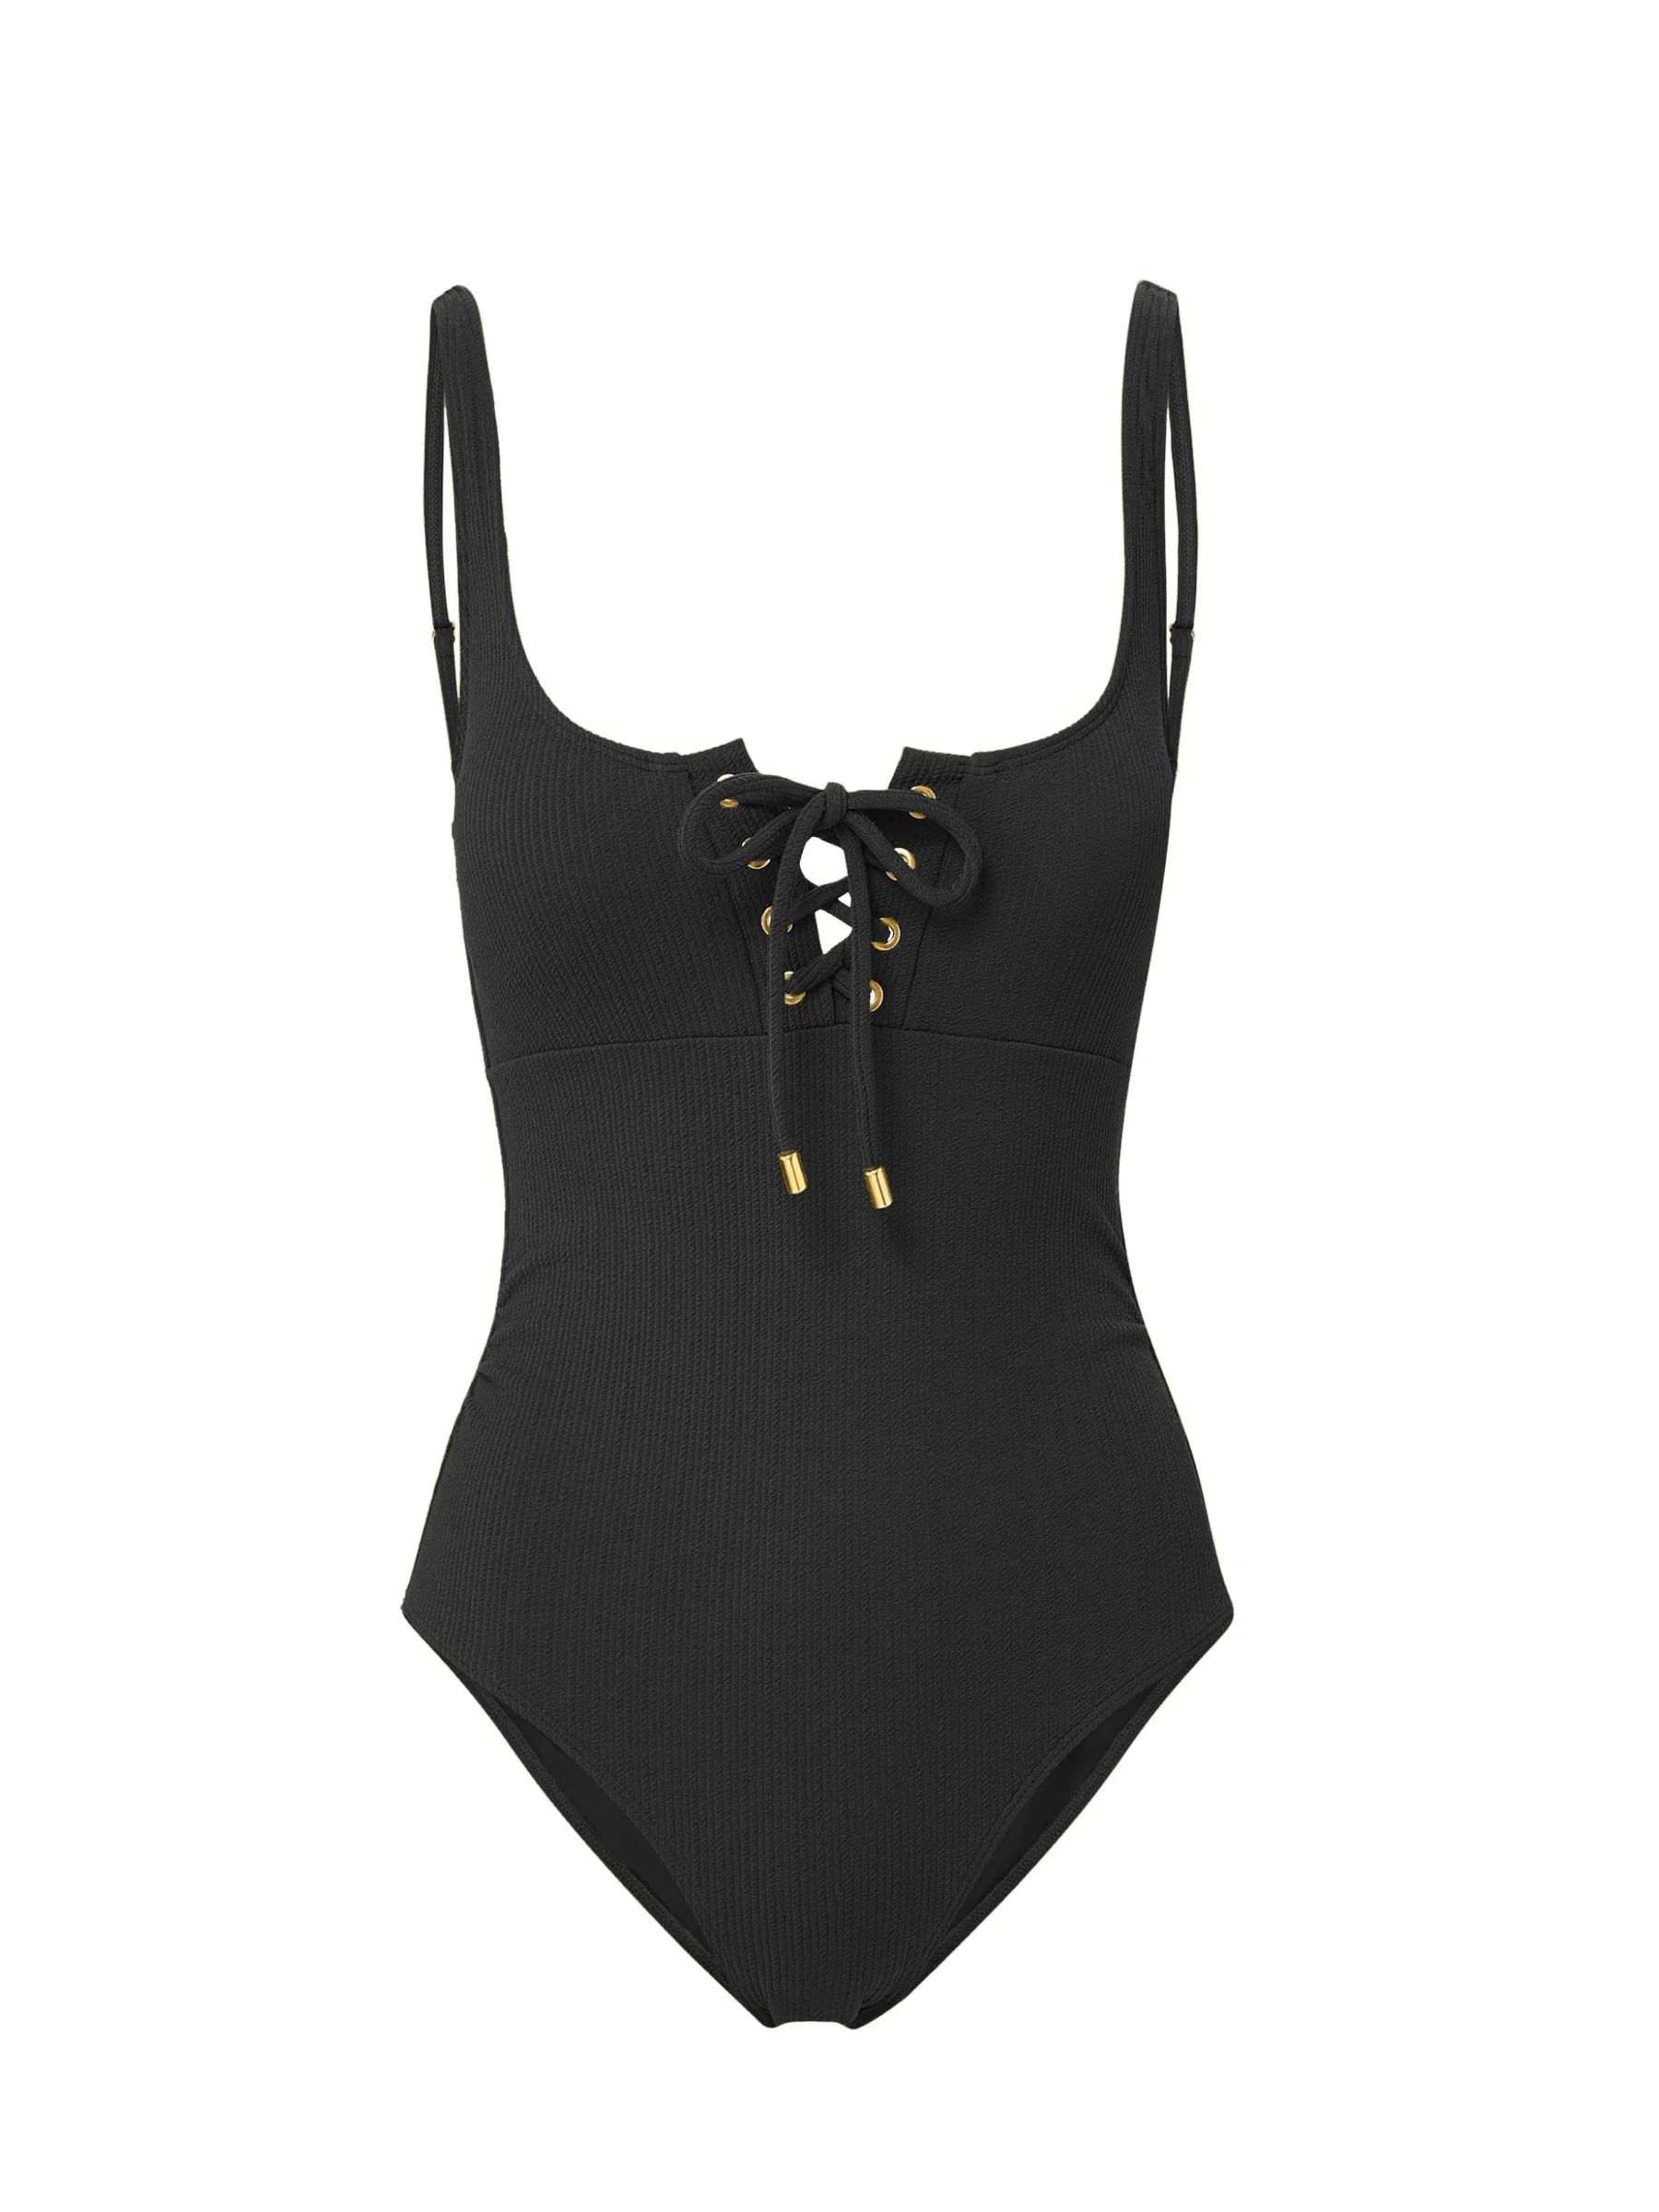 Taylor One Piece Black Texture | Change of Scenery